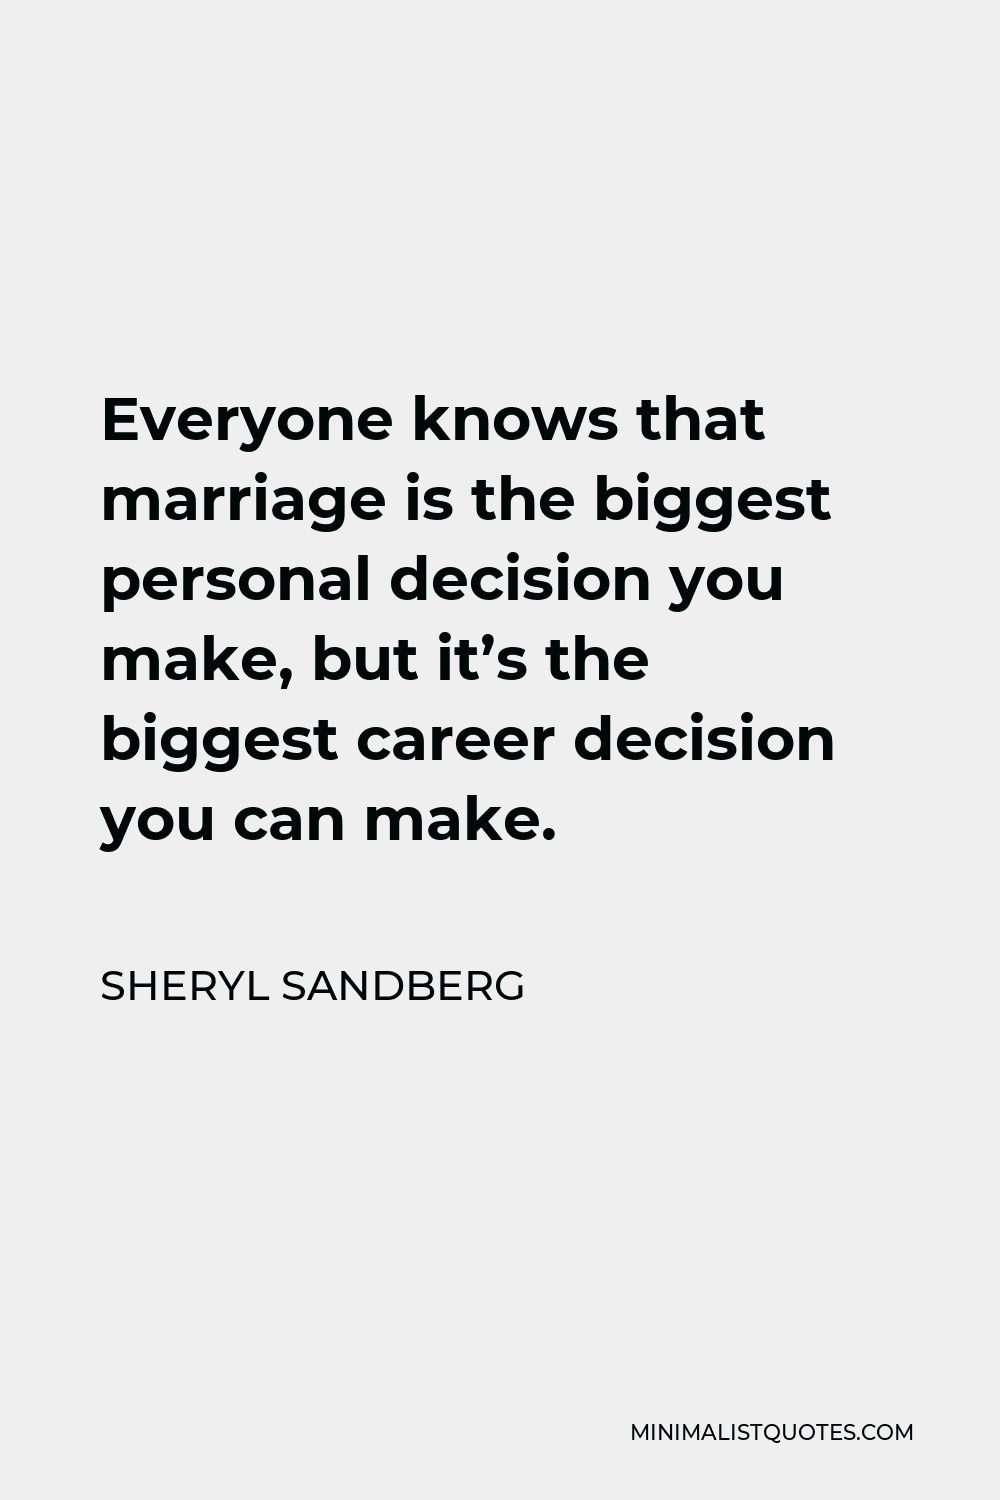 Sheryl Sandberg Quote - Everyone knows that marriage is the biggest personal decision you make, but it’s the biggest career decision you can make.